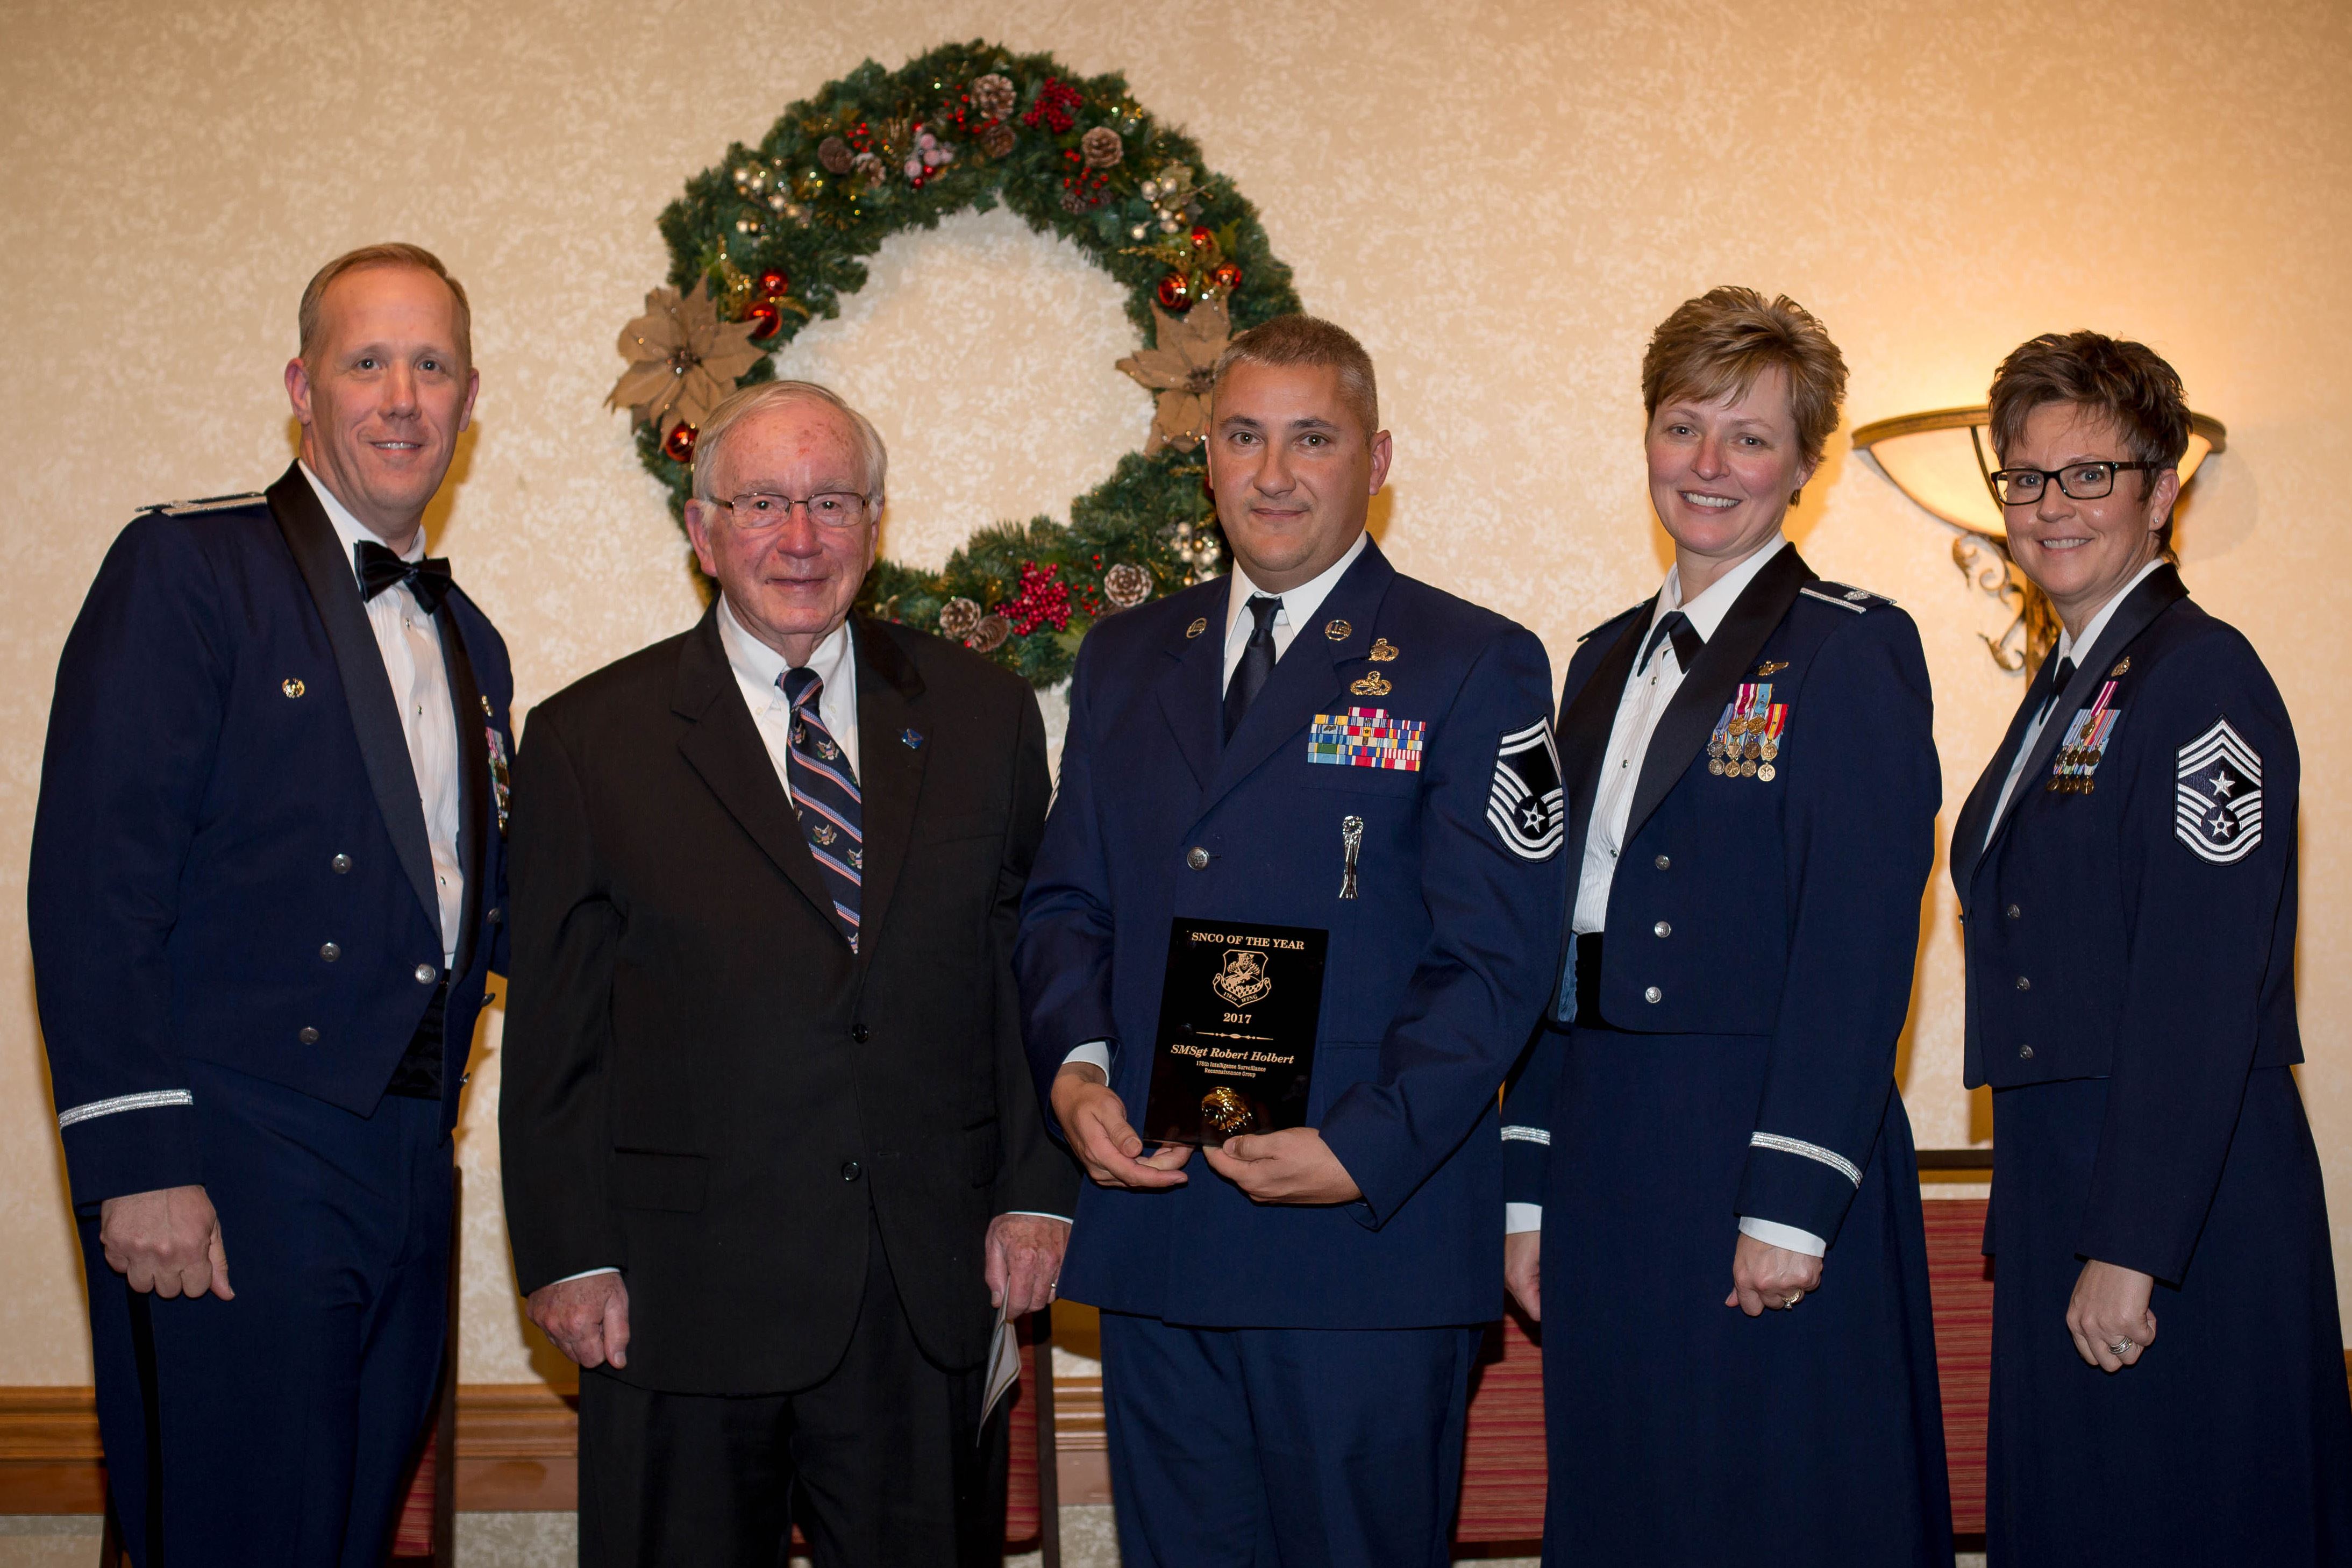 Airman of the Year award winners announced at military ball > 178th